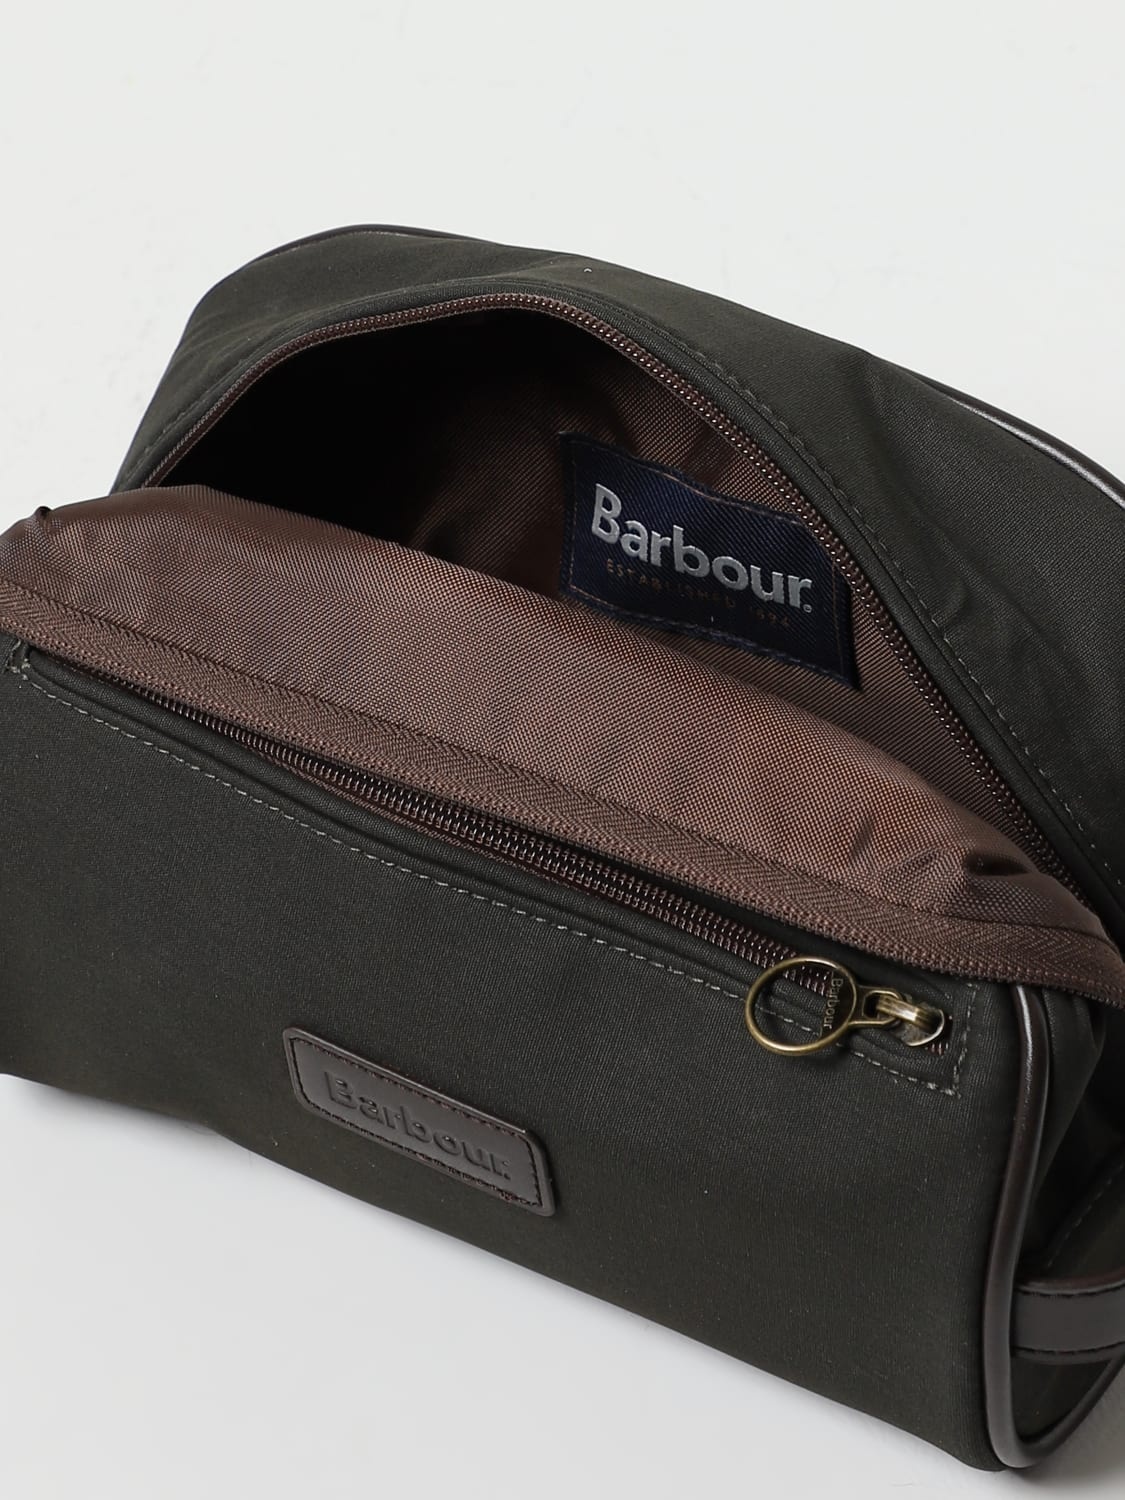 Barbour cosmetic case for man - 3